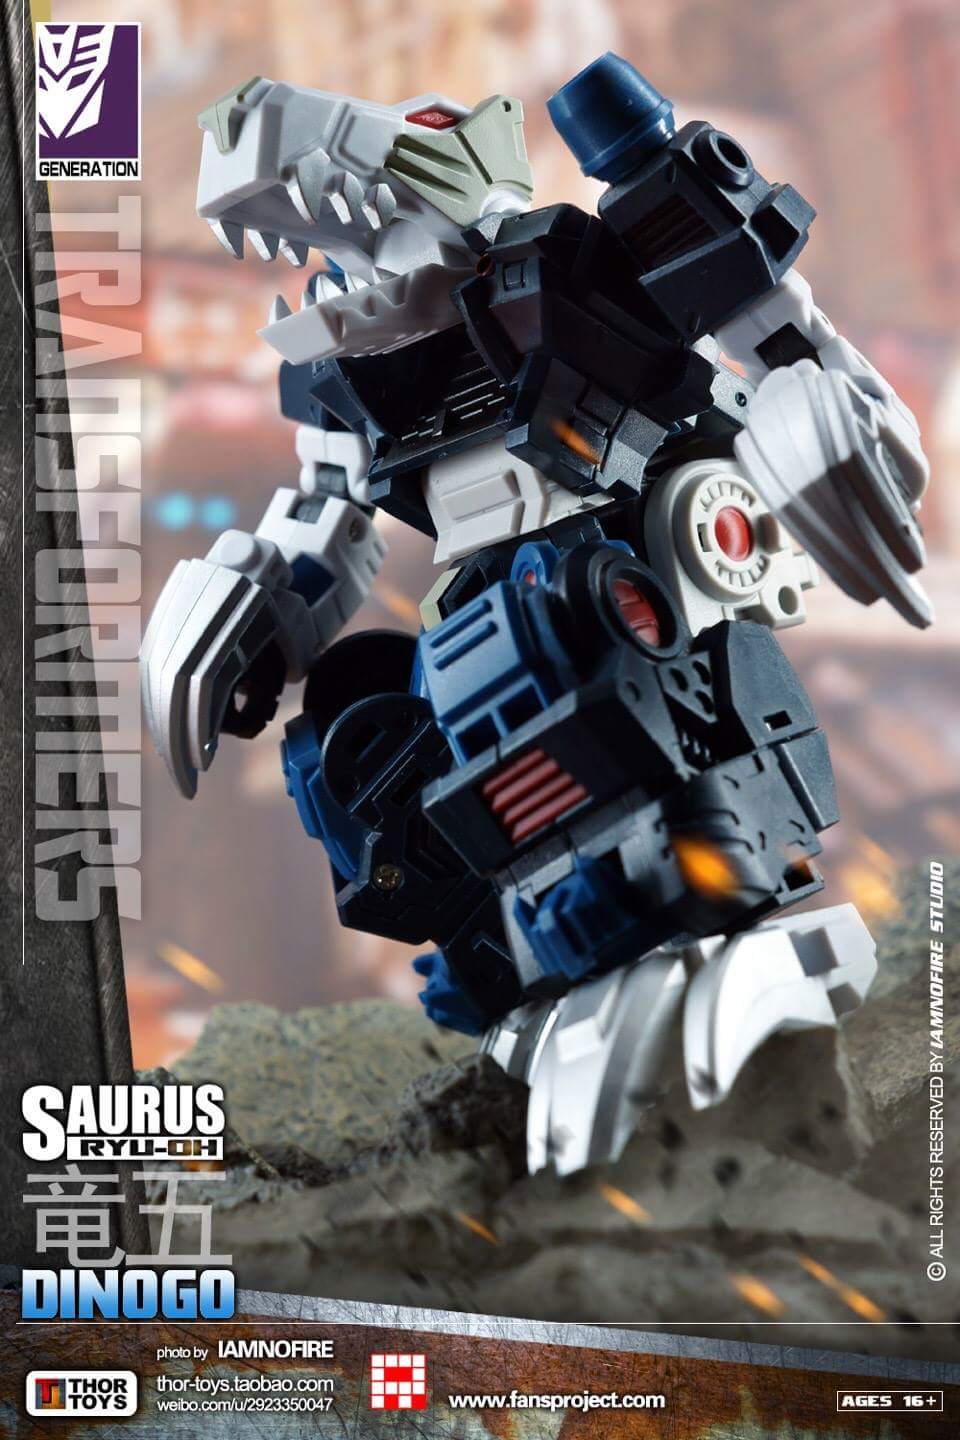 [FansProject] Produit Tiers - Ryu-Oh aka Dinoking (Victory) | Beastructor aka Monstructor (USA) - Page 2 FJkxi822